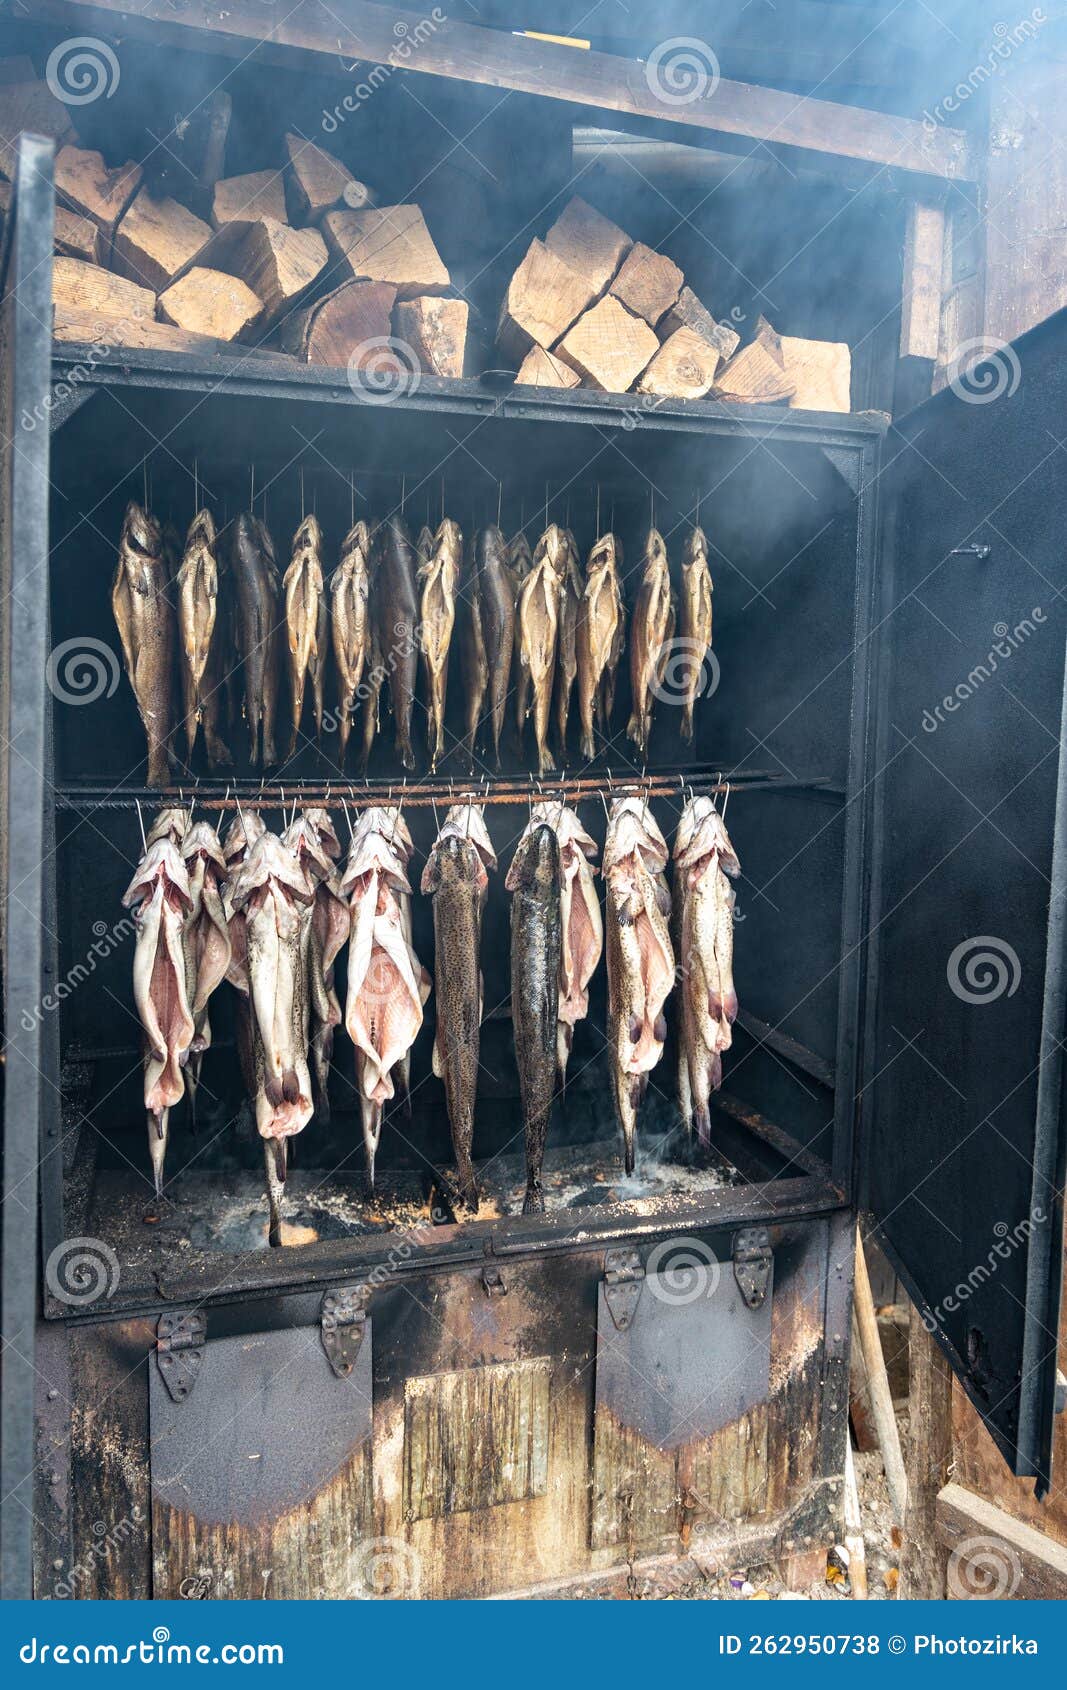 Smoking Rainbow Trout Fish in a Smoker.Trout Hanging in Wire Hooks from  Rack Stock Photo - Image of cooking, omega: 262950738